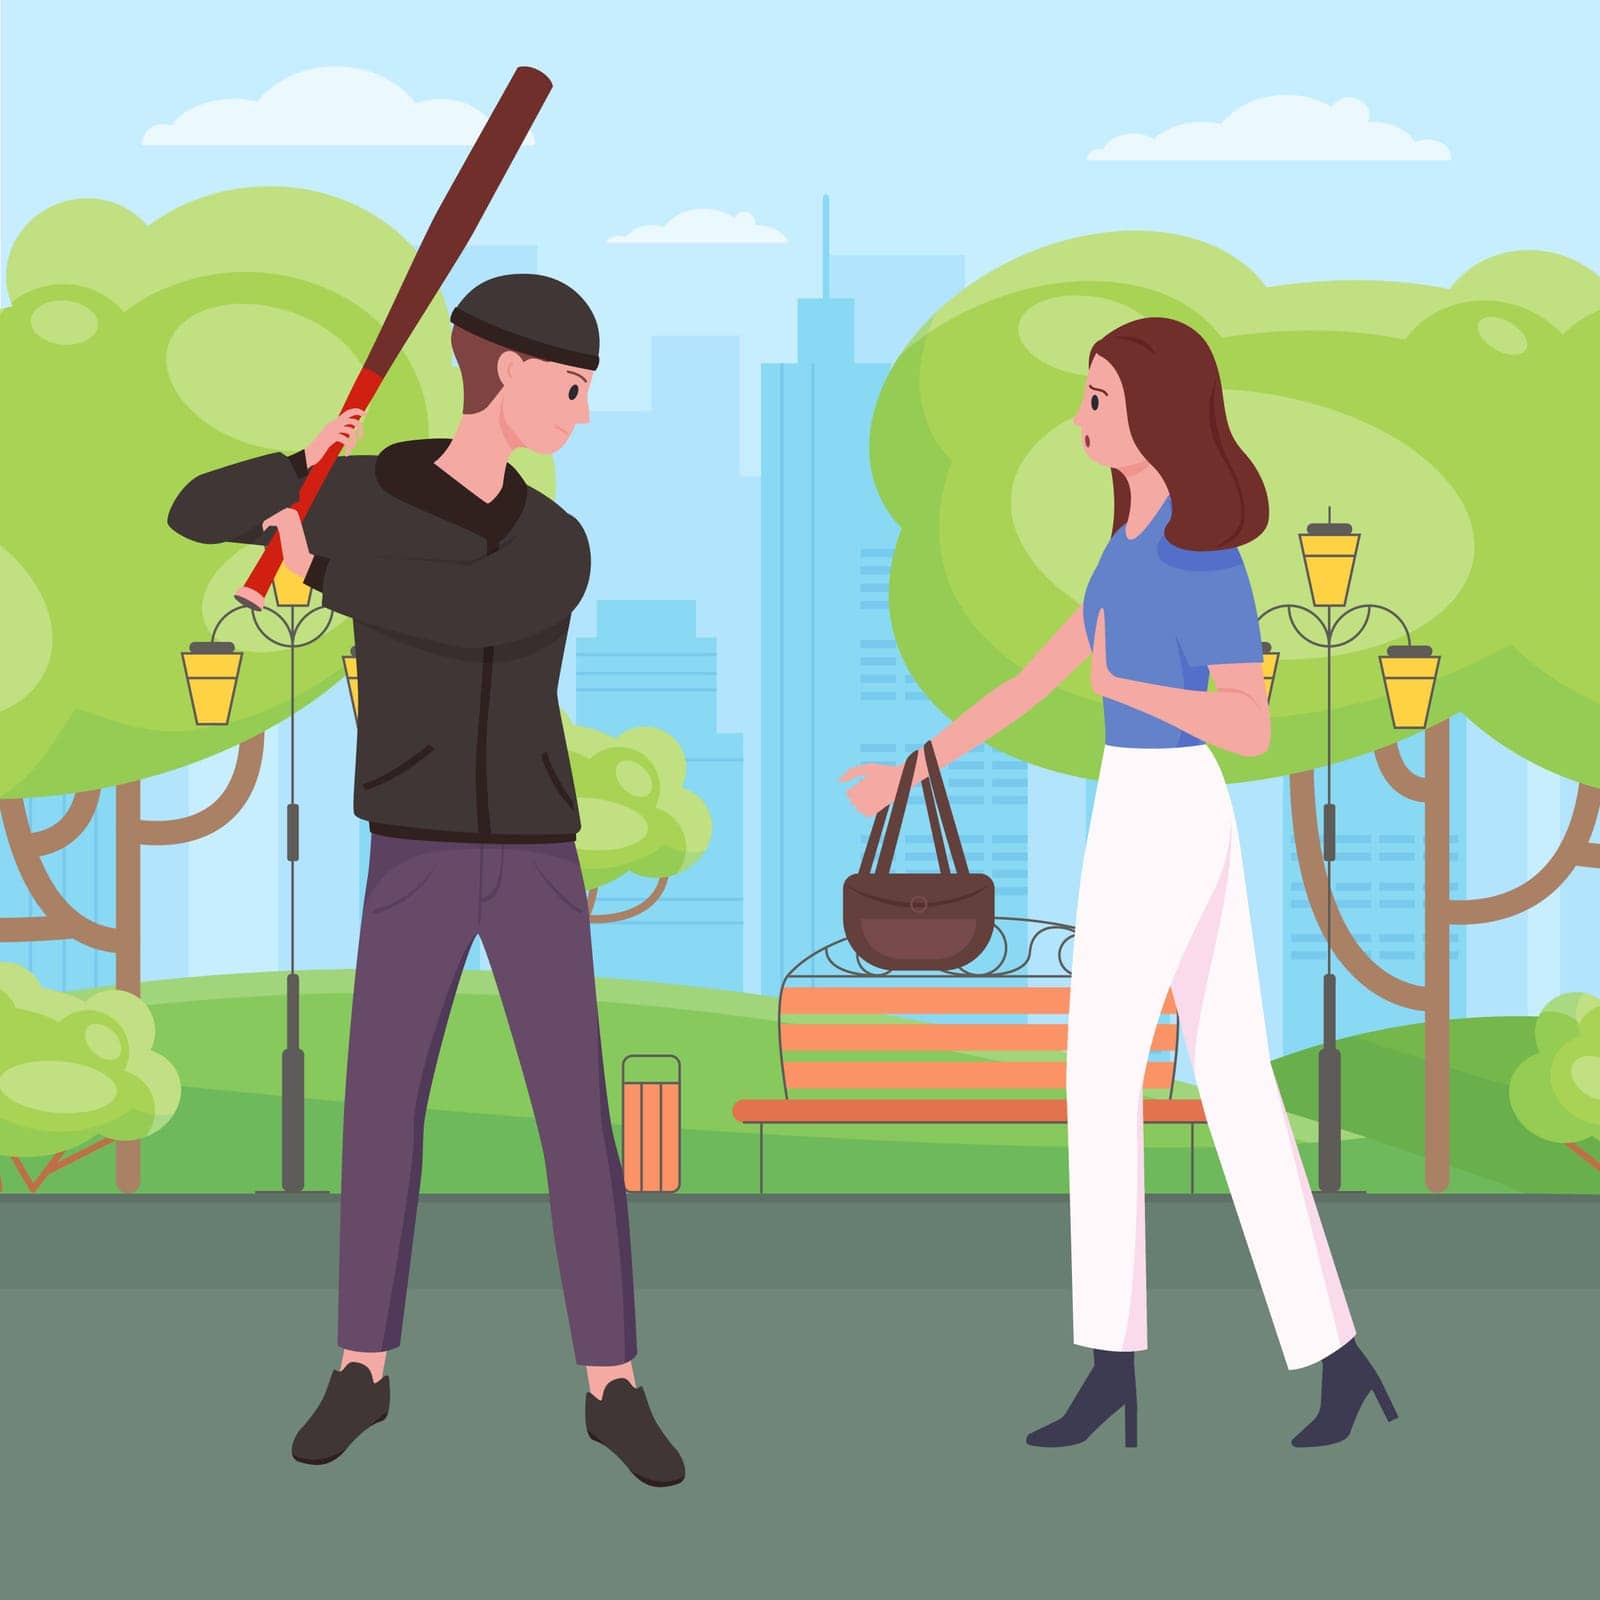 Robbery and theft on city street vector illustration. Cartoon dangerous burglar and girl victim standing on alley of park, threat from male robber with stick to take away bag from walking woman